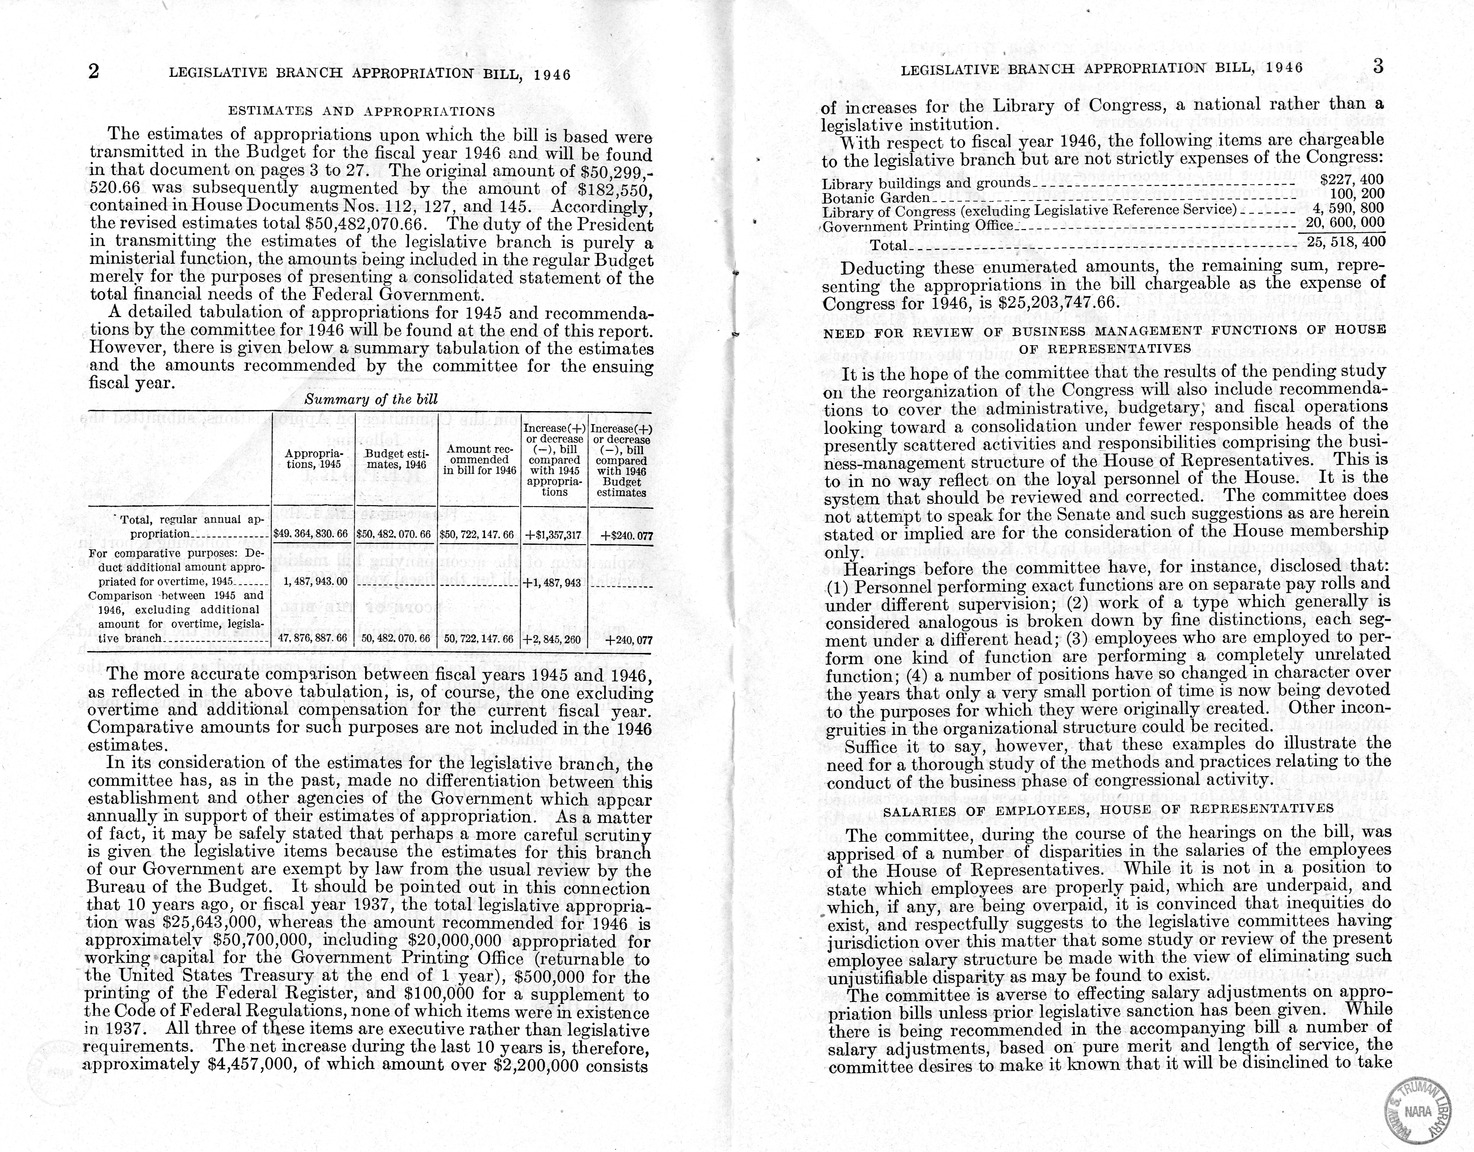 Memorandum from Harold D. Smith to M. C. Latta, H.R. 3109, Making Appropriations for the Legislative Branch for the Fiscal Year Ending June 30, 1946, with Attachments